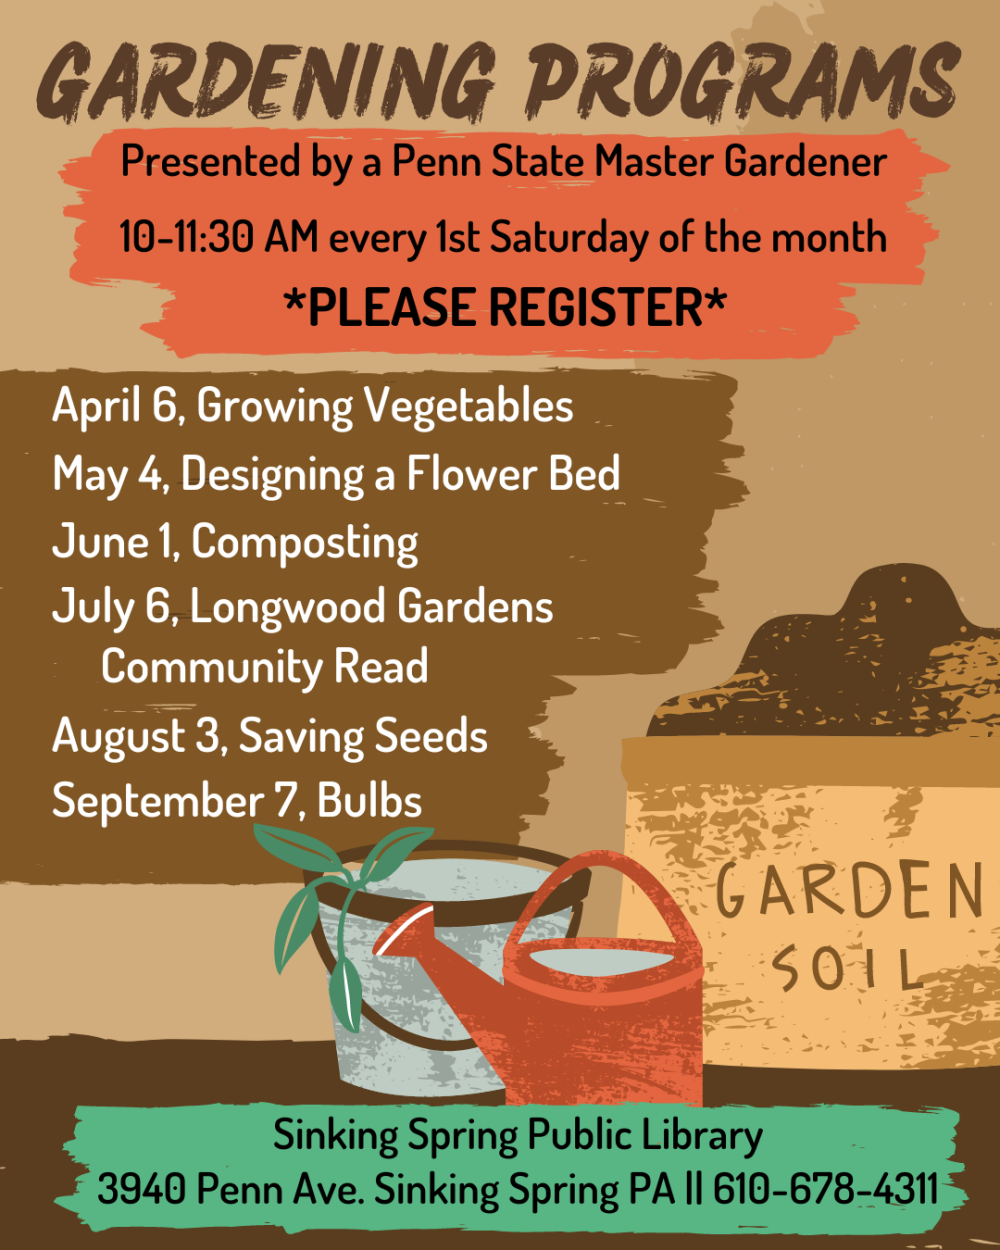 Gardening program topics with a Penn State Master Gardener are listed.